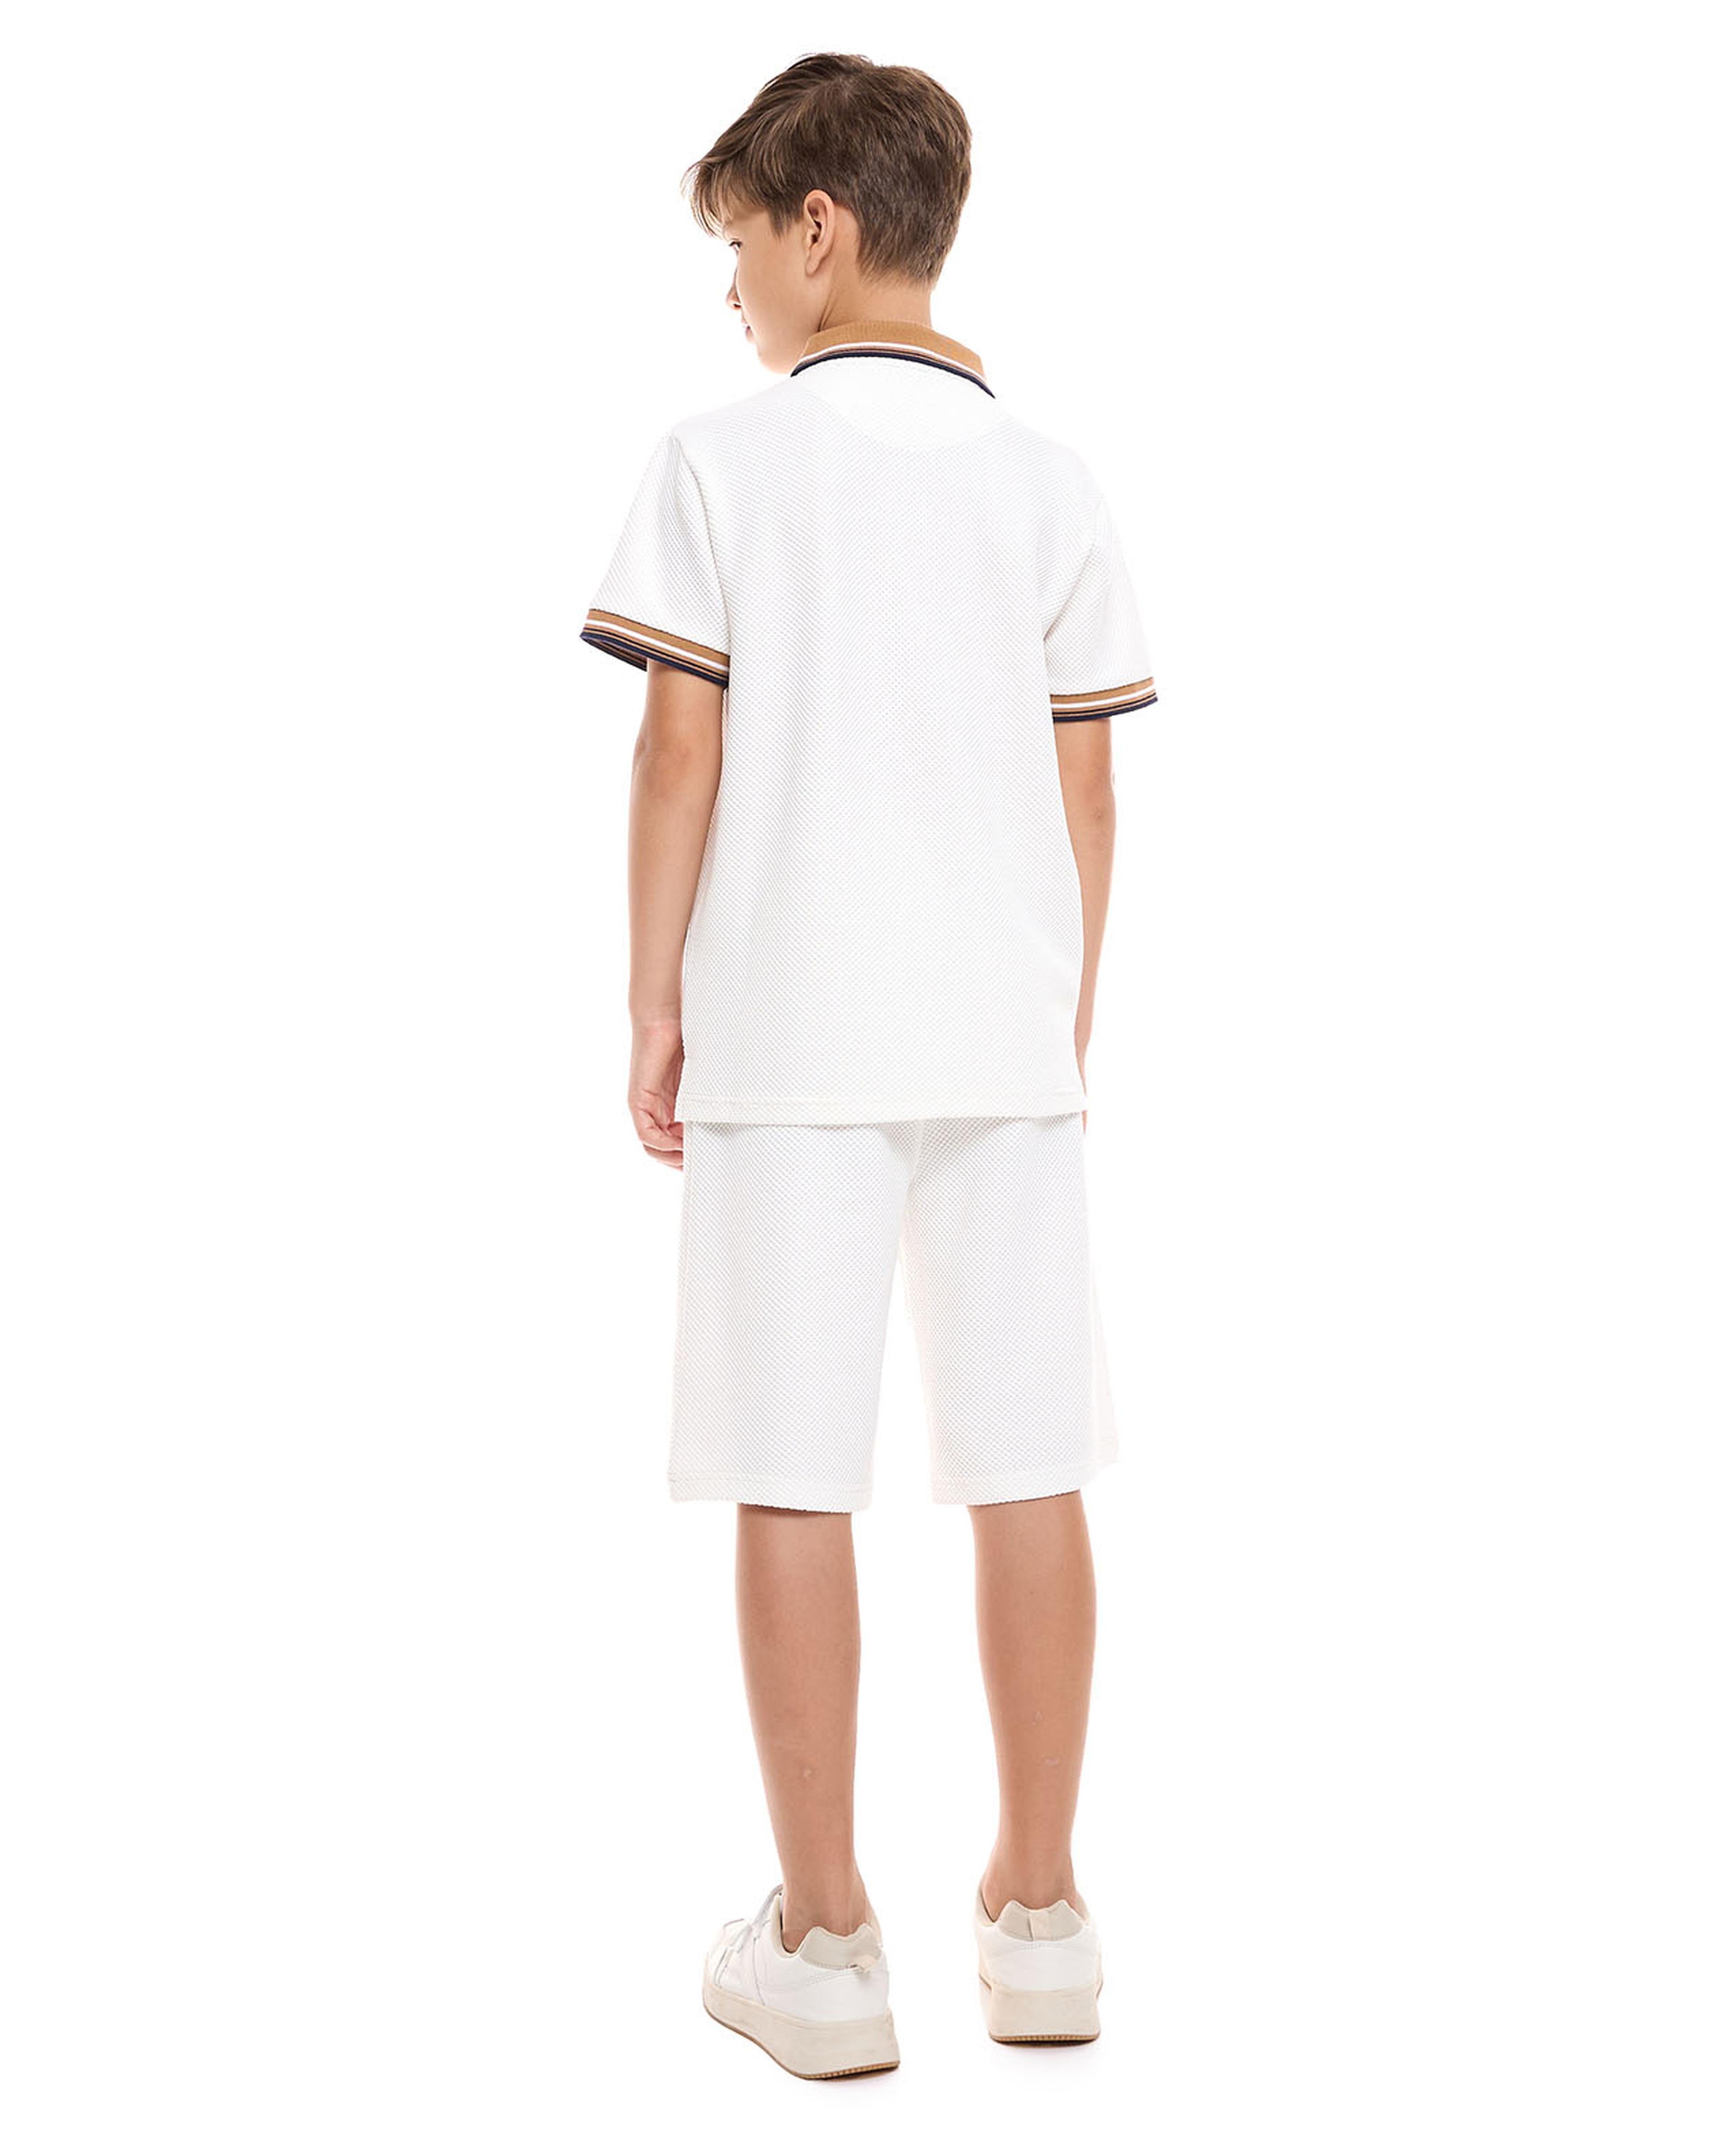 Contrast Tipping Polo T-Shirt and Shorts Set